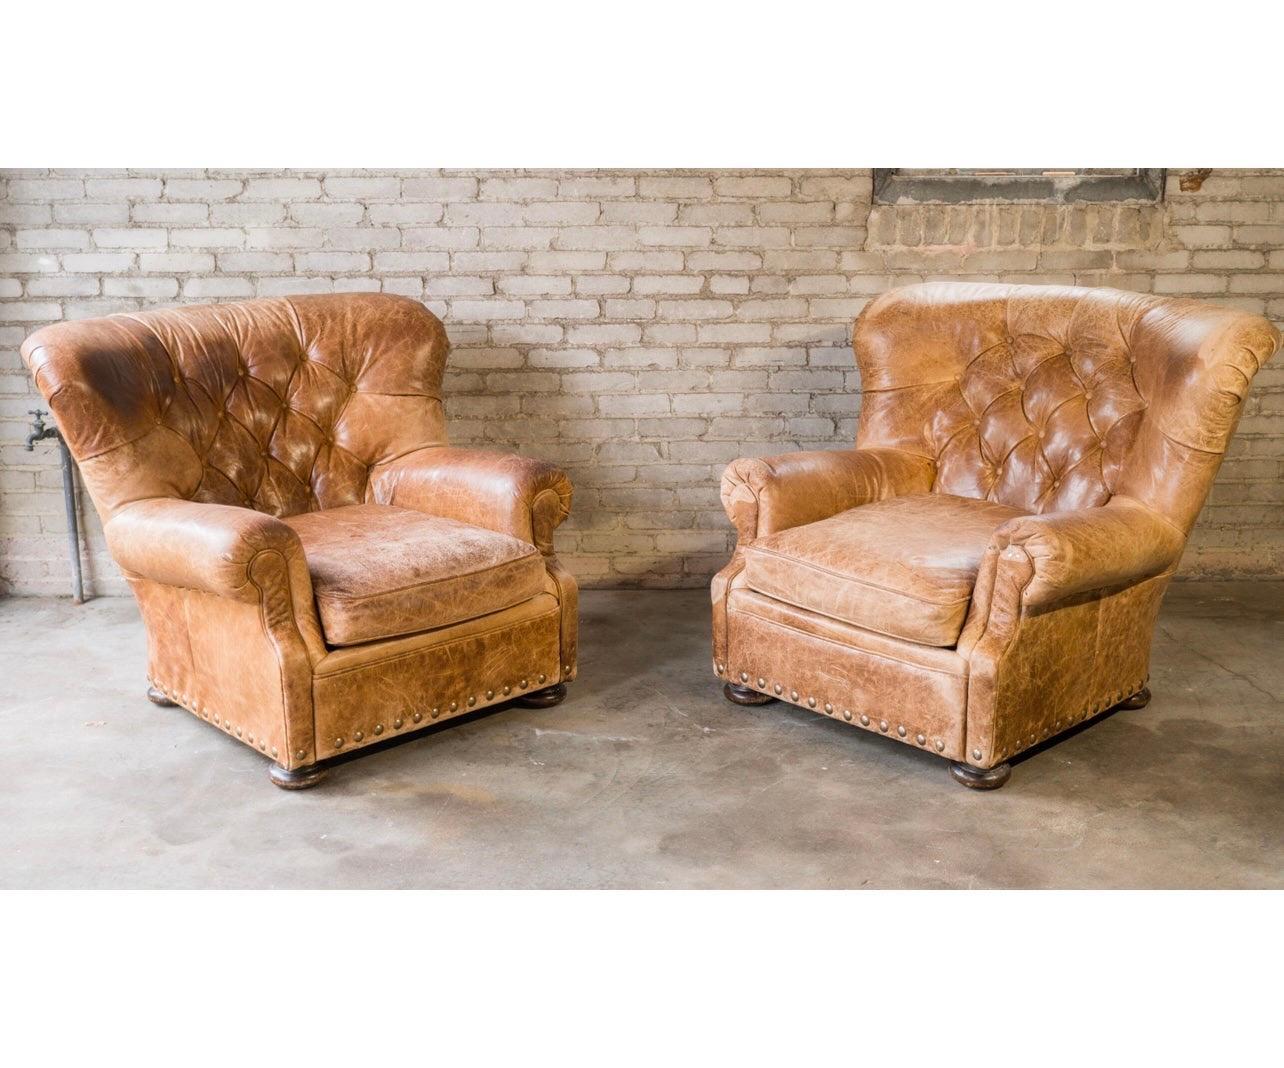 Pair of Tufted leather writer's club chairs presented in a beautifully distressed cigar leather. Reminiscent of Ralph Lauren writer's chair. Brass nailhead trip, removable seat cushion, tufted leather backrest. Nice patina, good springs and foam.